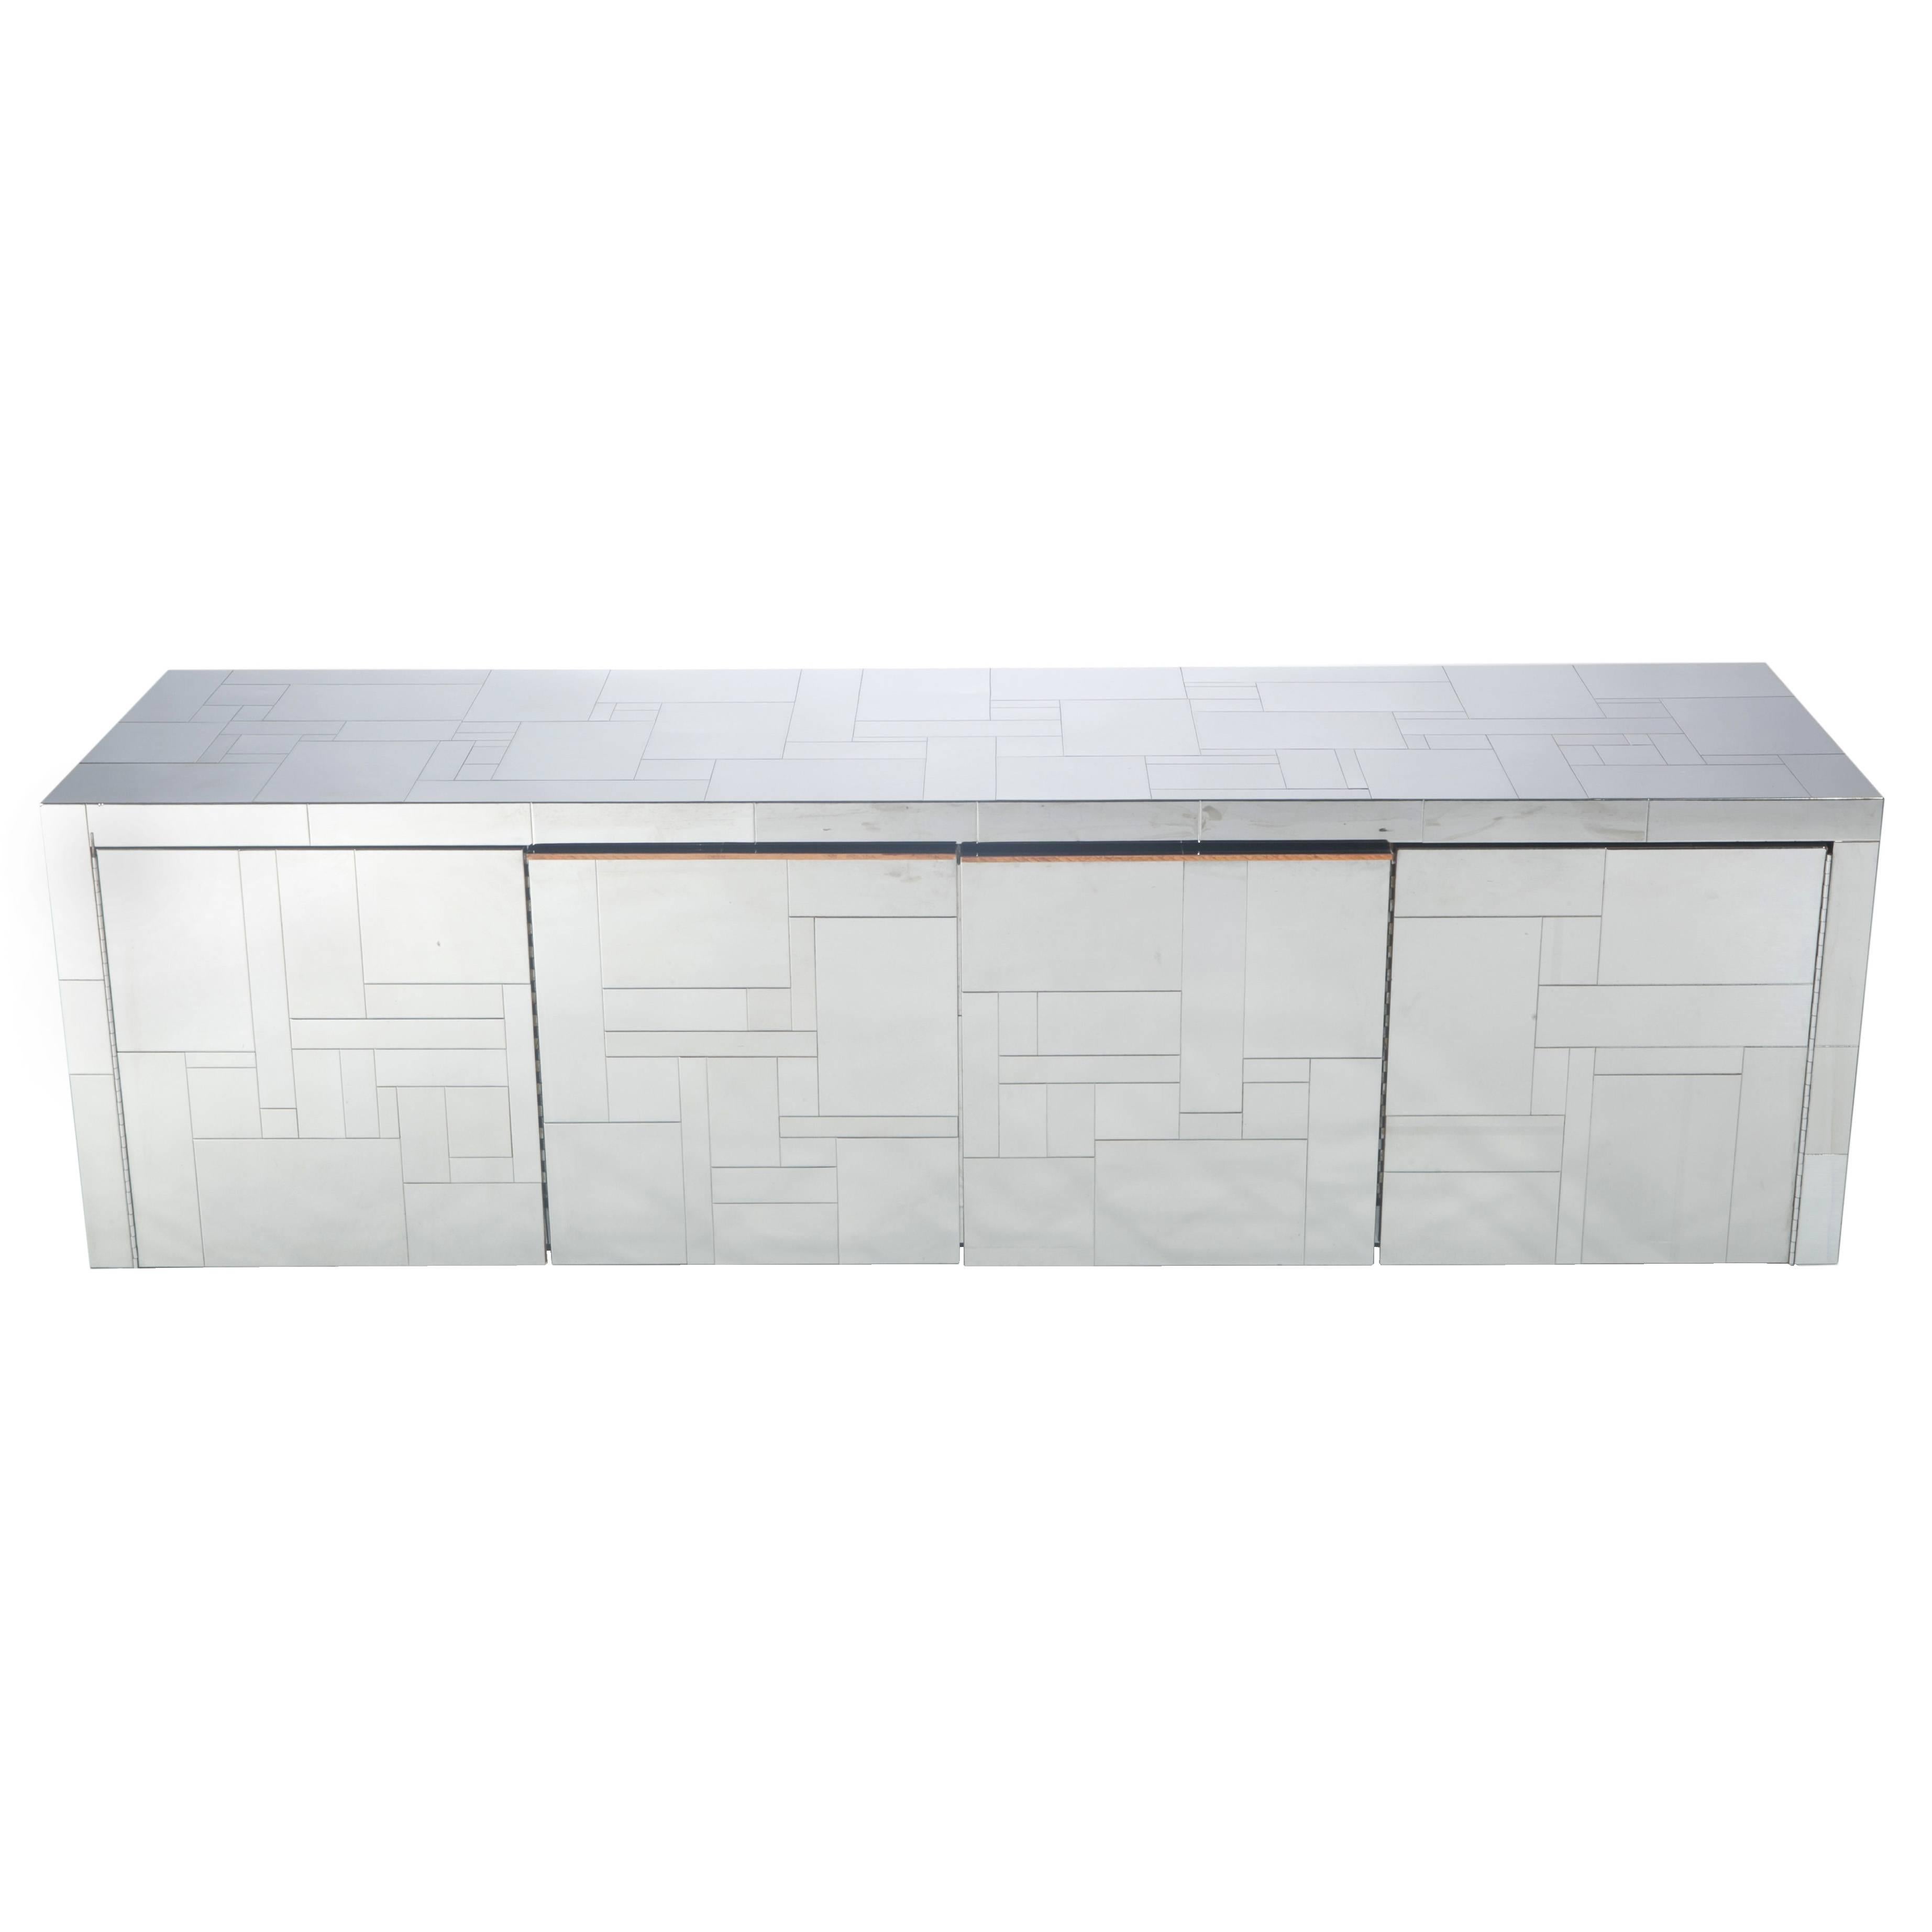 Wall-Mounted Paul Evans Chrome "Cityscape" Cabinet